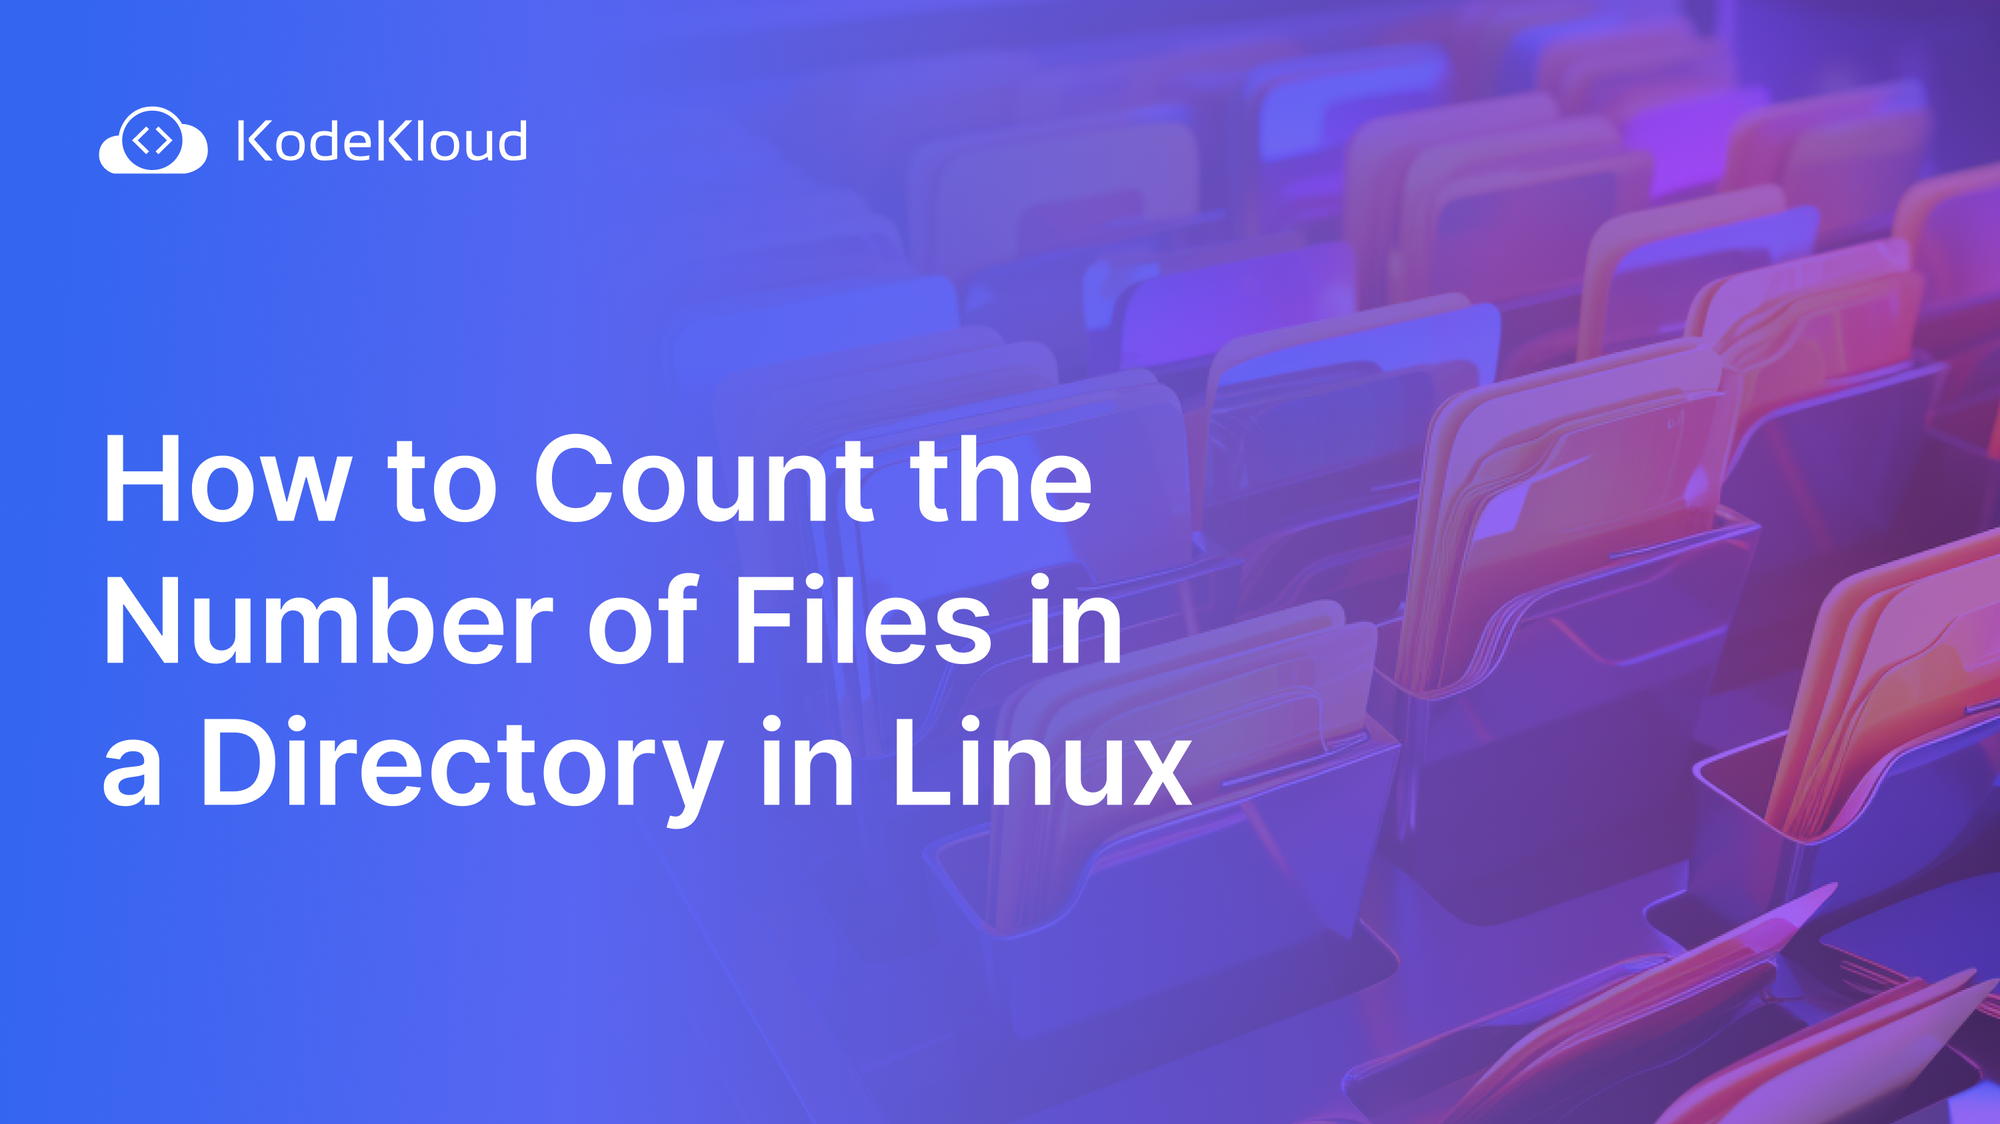 How to Count the Number of Files in a Directory in Linux